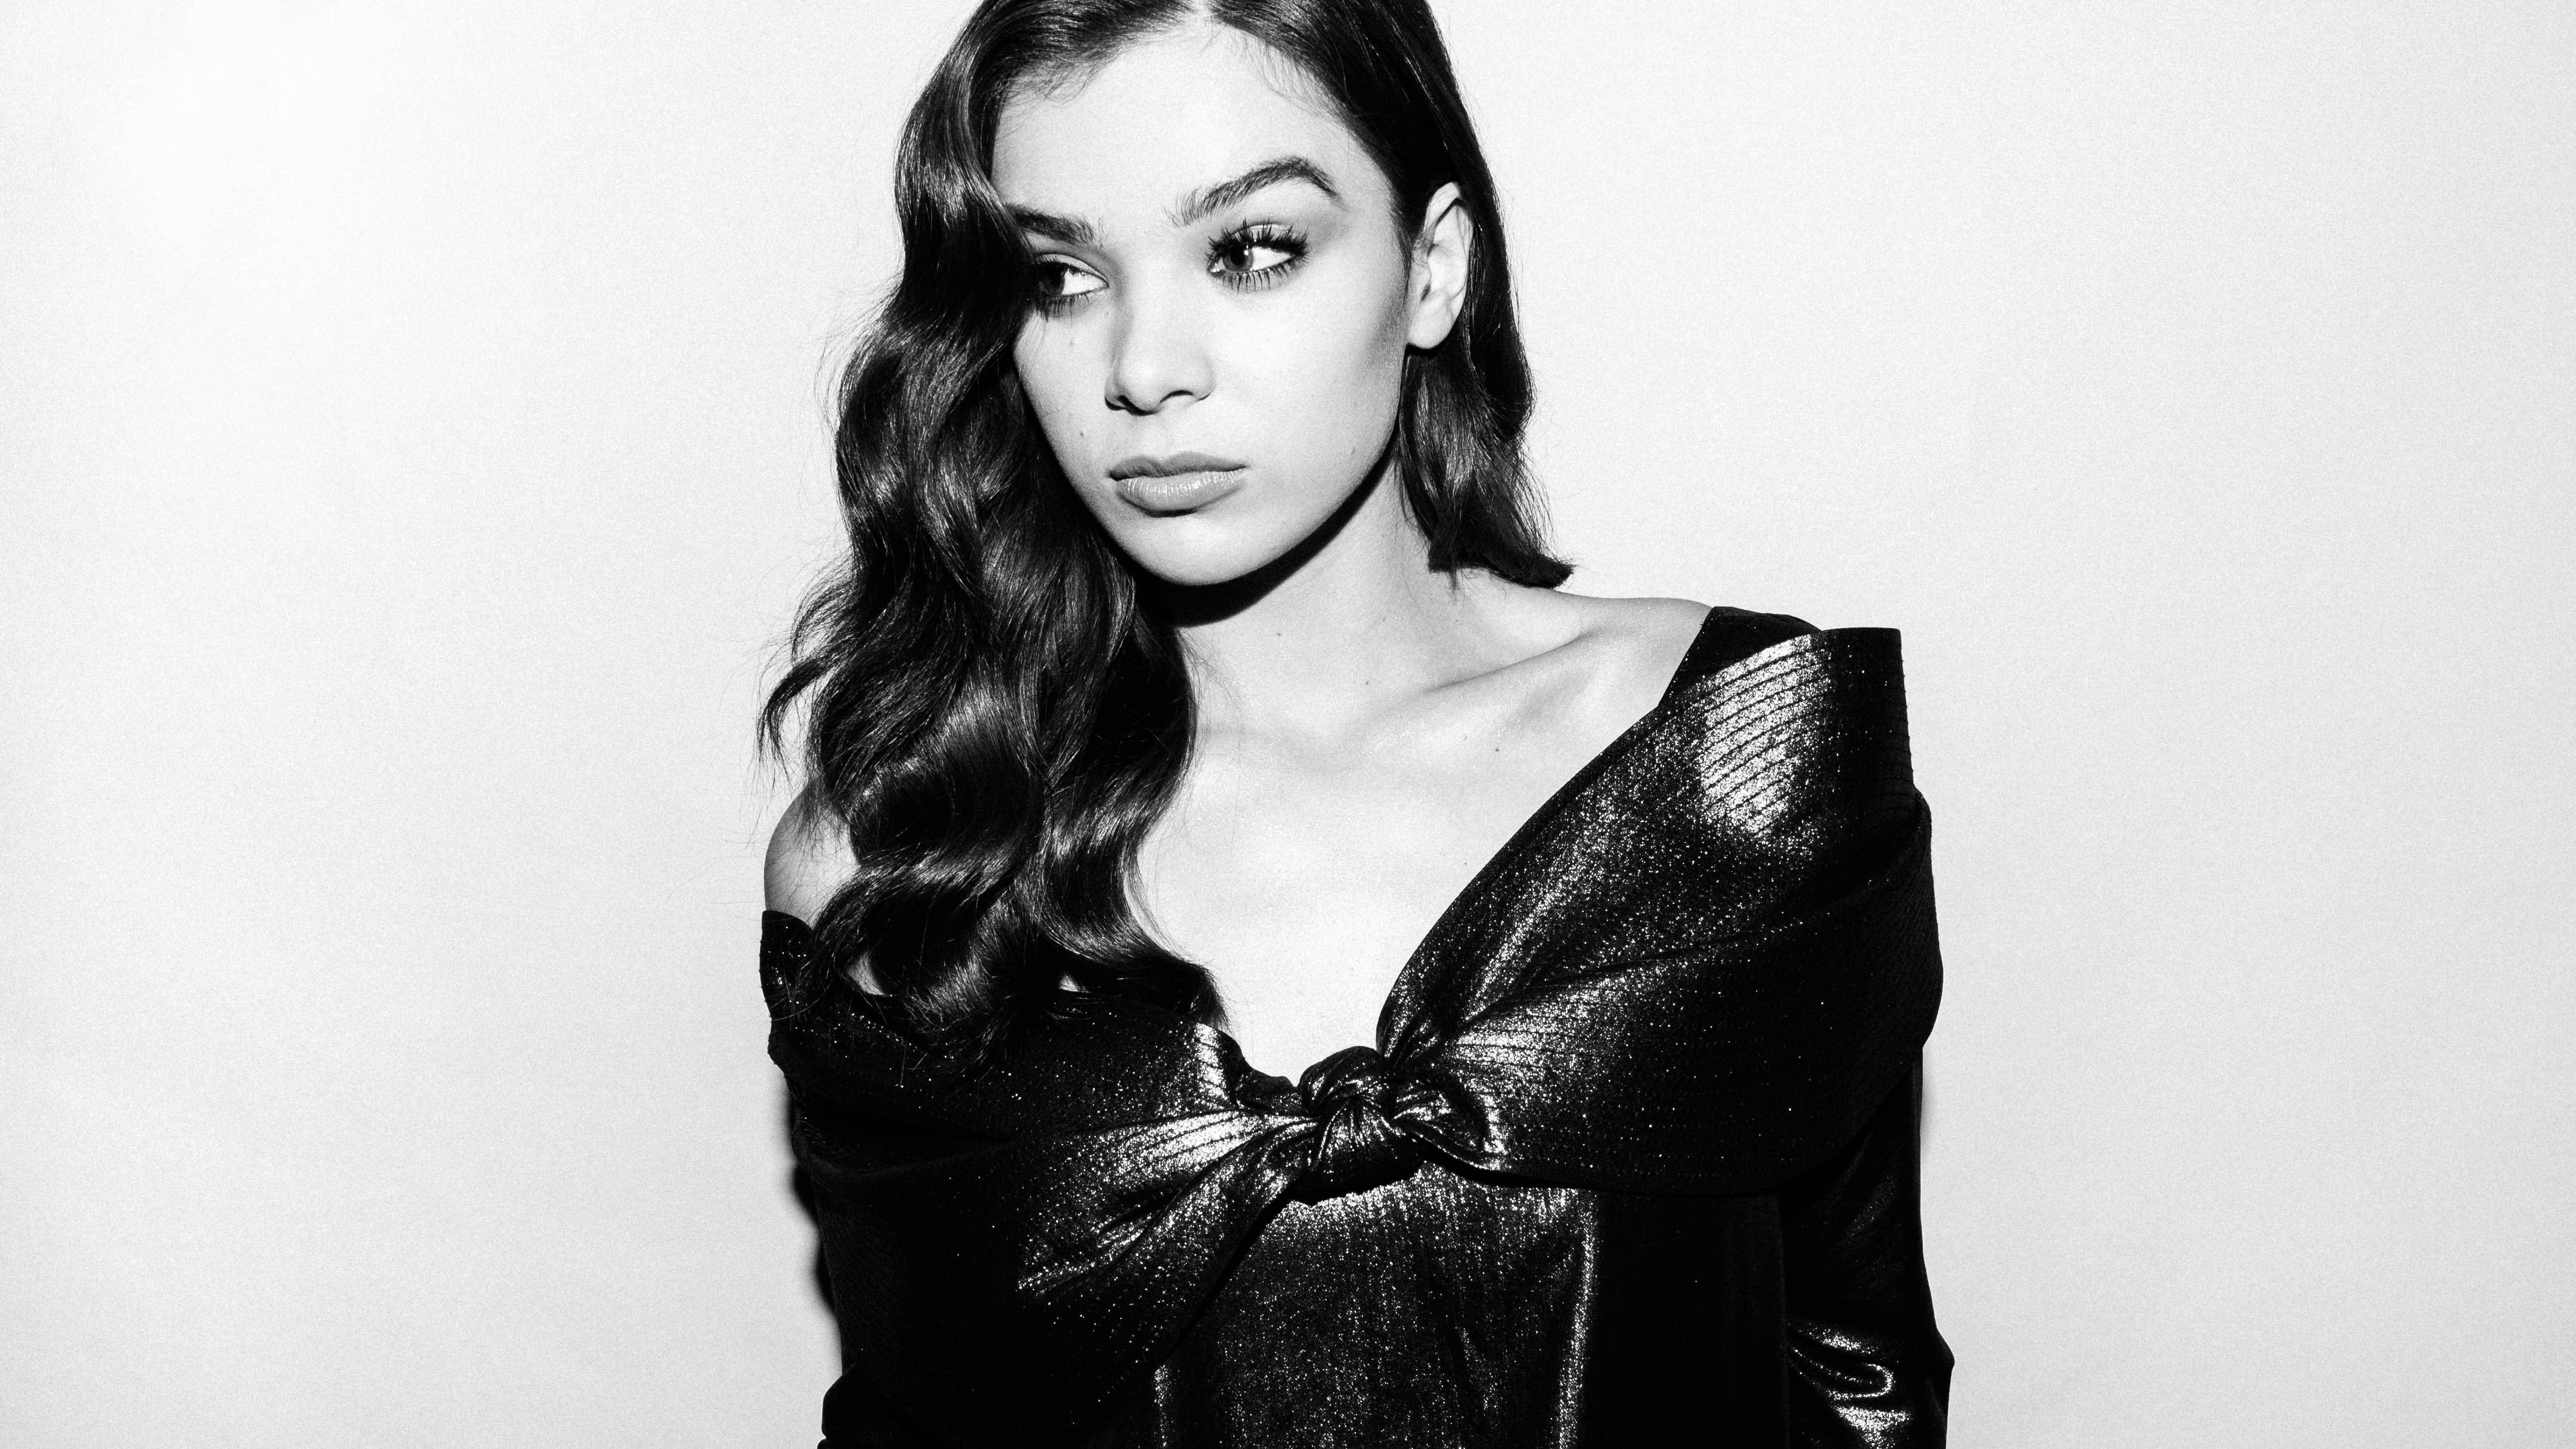 A shot of Hailee Steinfeld in black and white